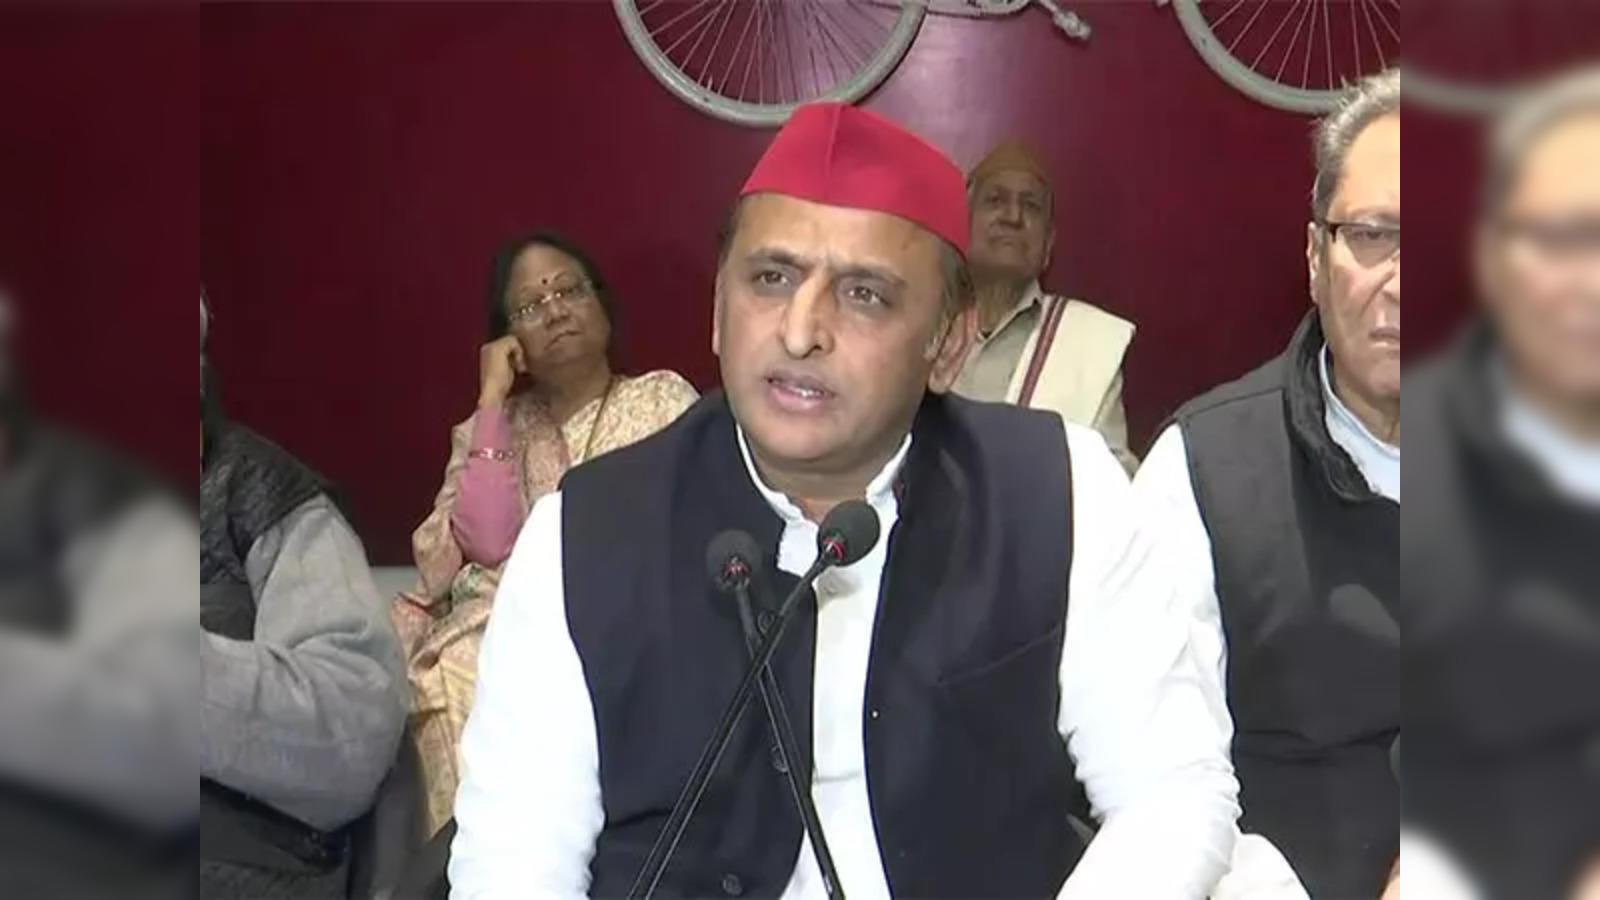 Talks of alliance with Congress for LS polls in progress: SP chief Akhilesh  - The Economic Times